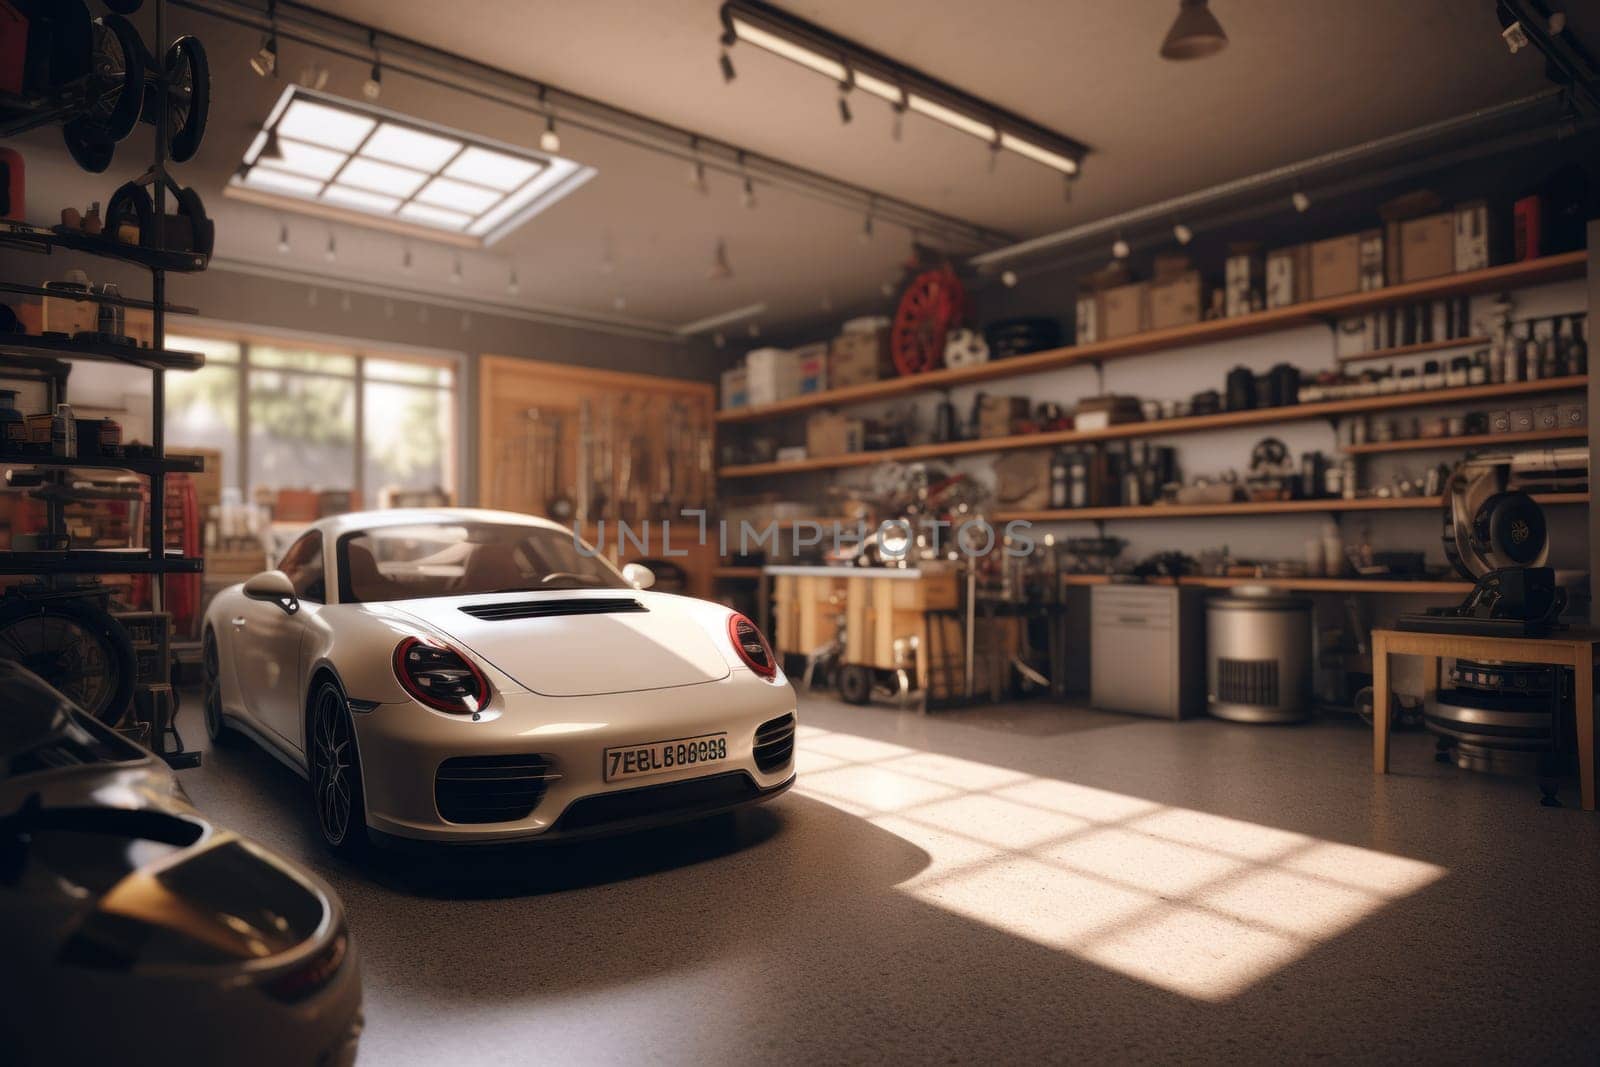 Photo of car garage complete with workshop equipment.